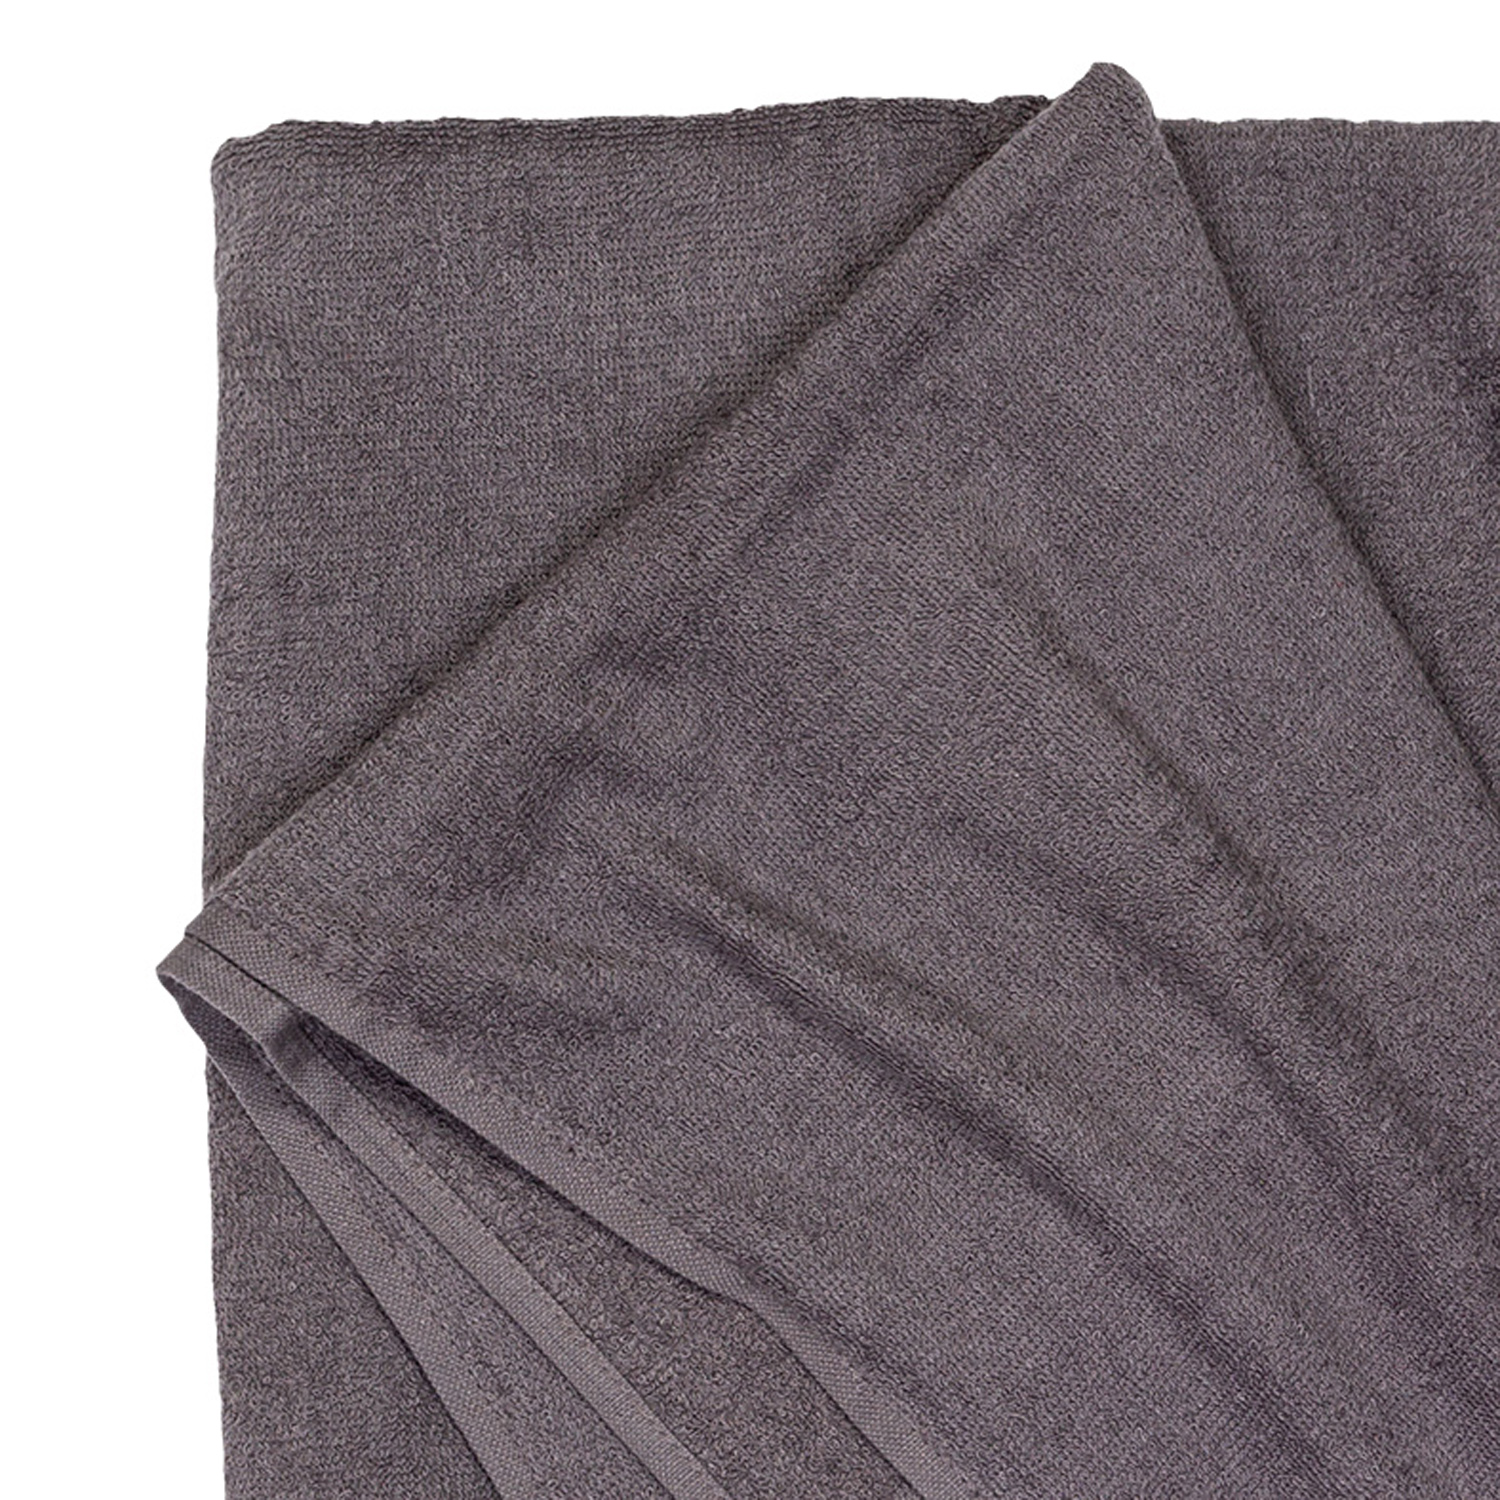 Bath towel series Helsinki in anthracite by Adamo in large sizes 100x220 cm or 155x220 cm